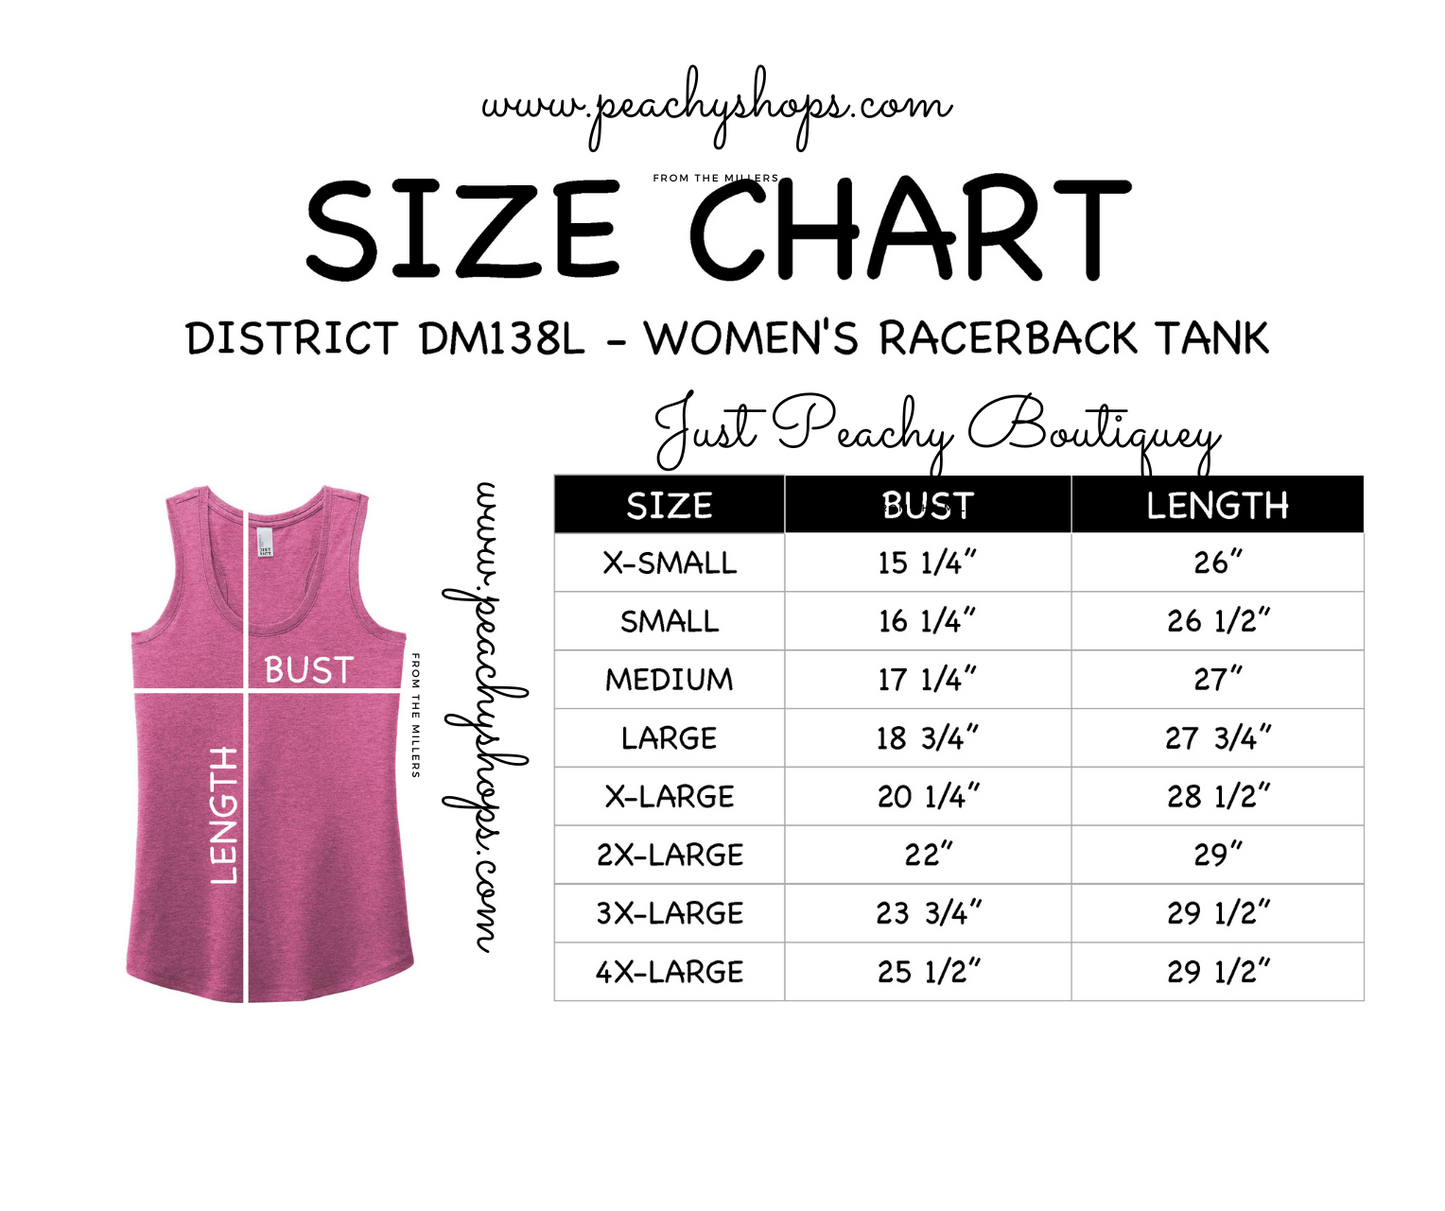 FIRST GRADE T-SHIRT TANK TOP OR SWEATERE